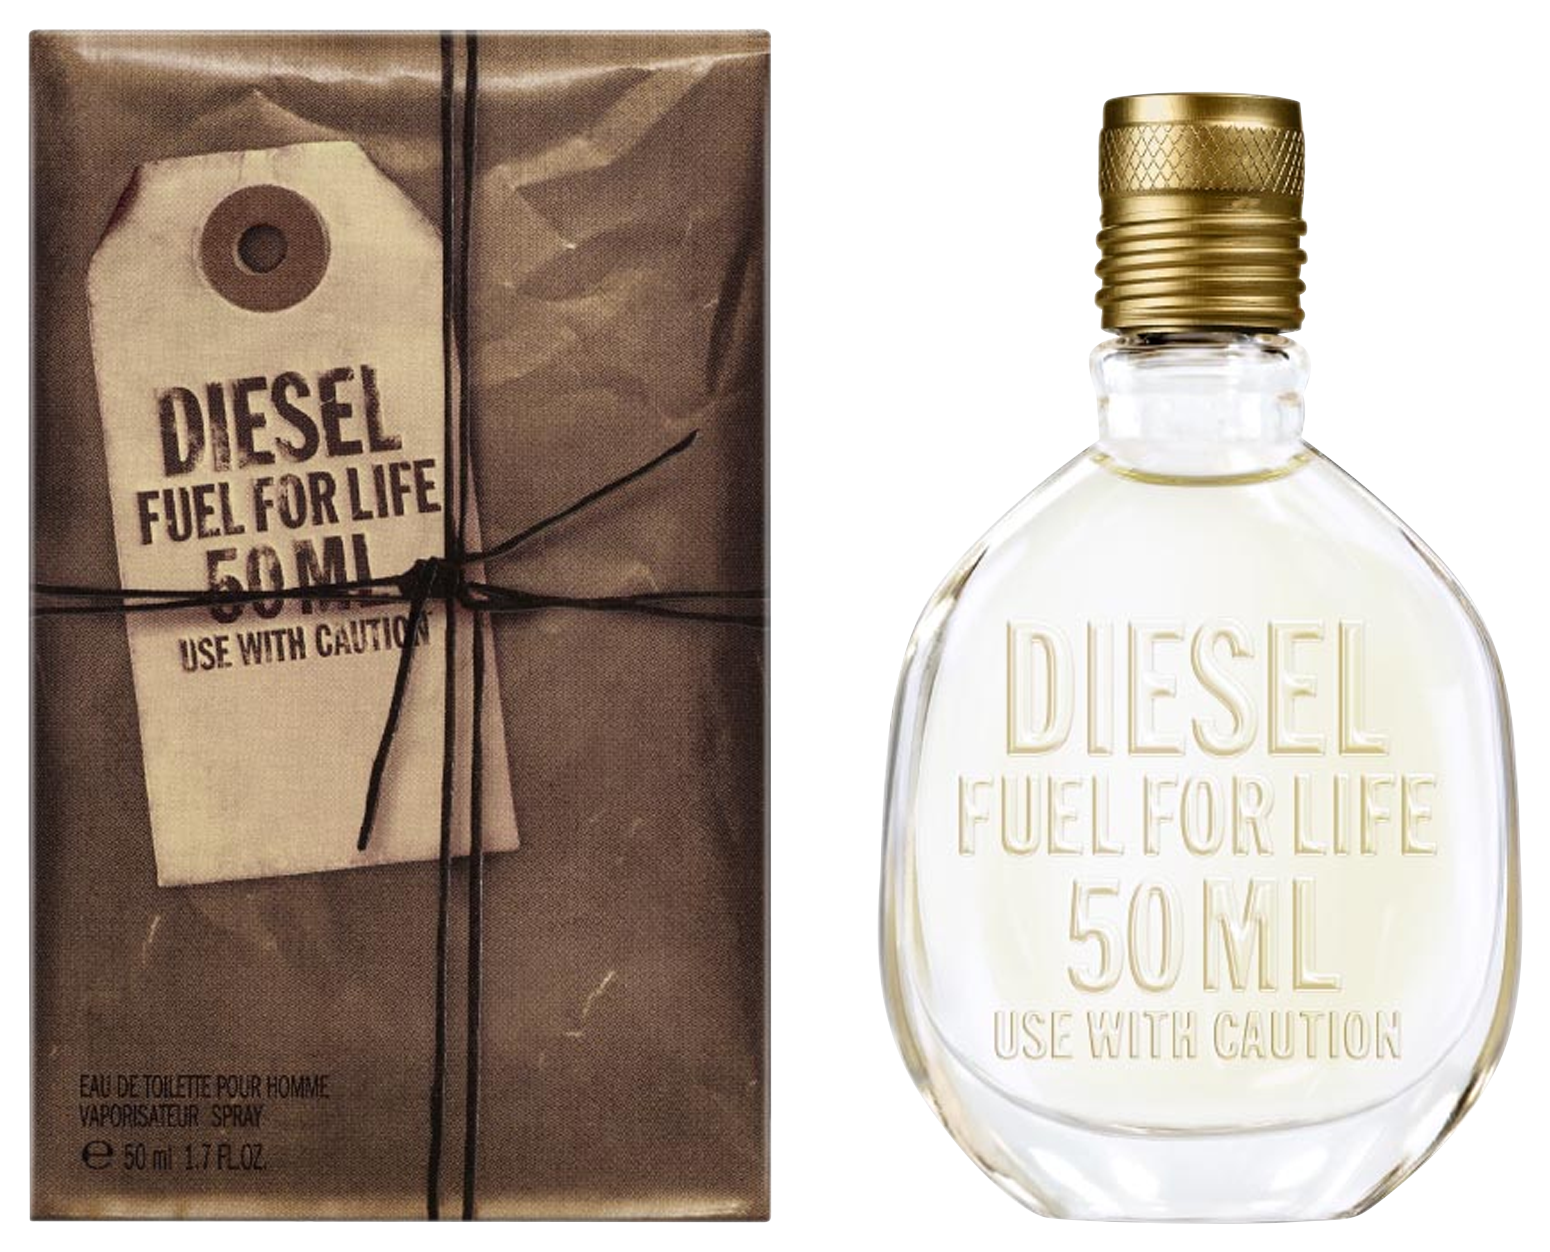 Diesel Fuel for Life He, 50ml